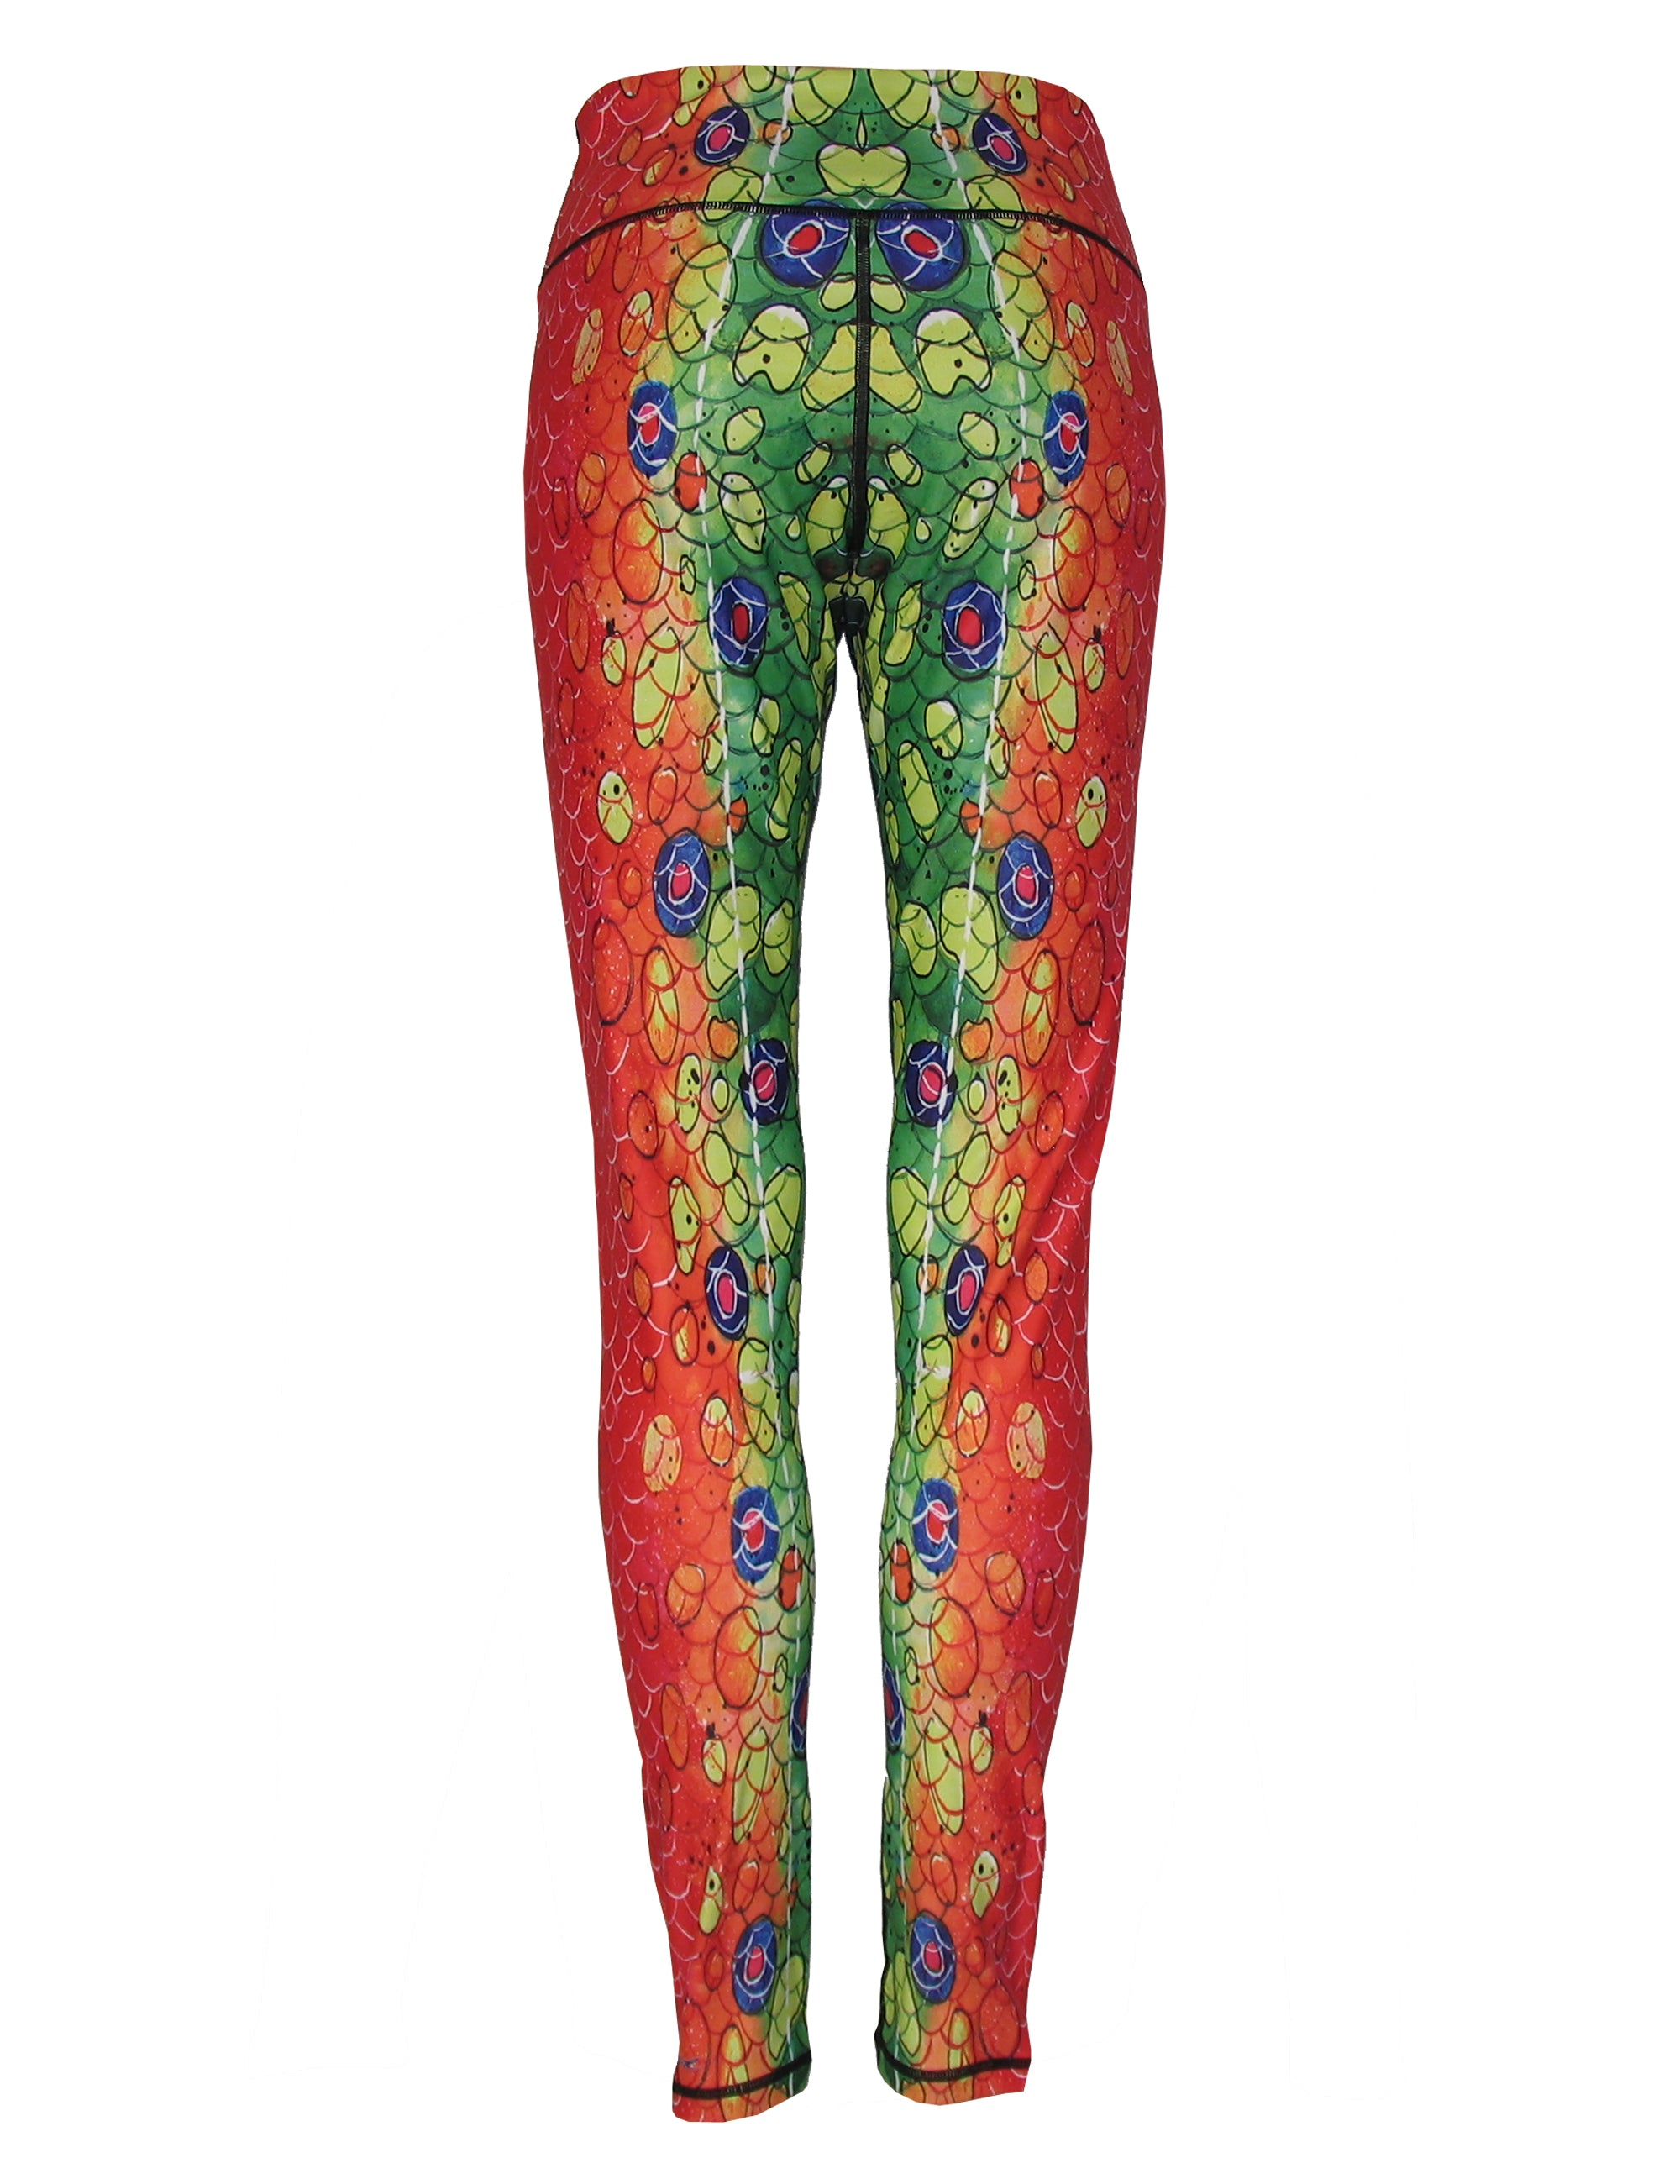 Brook Trout2 All Sport Leggings  Women's Fly Fishing Clothing - Cognito  Brands, Inc.